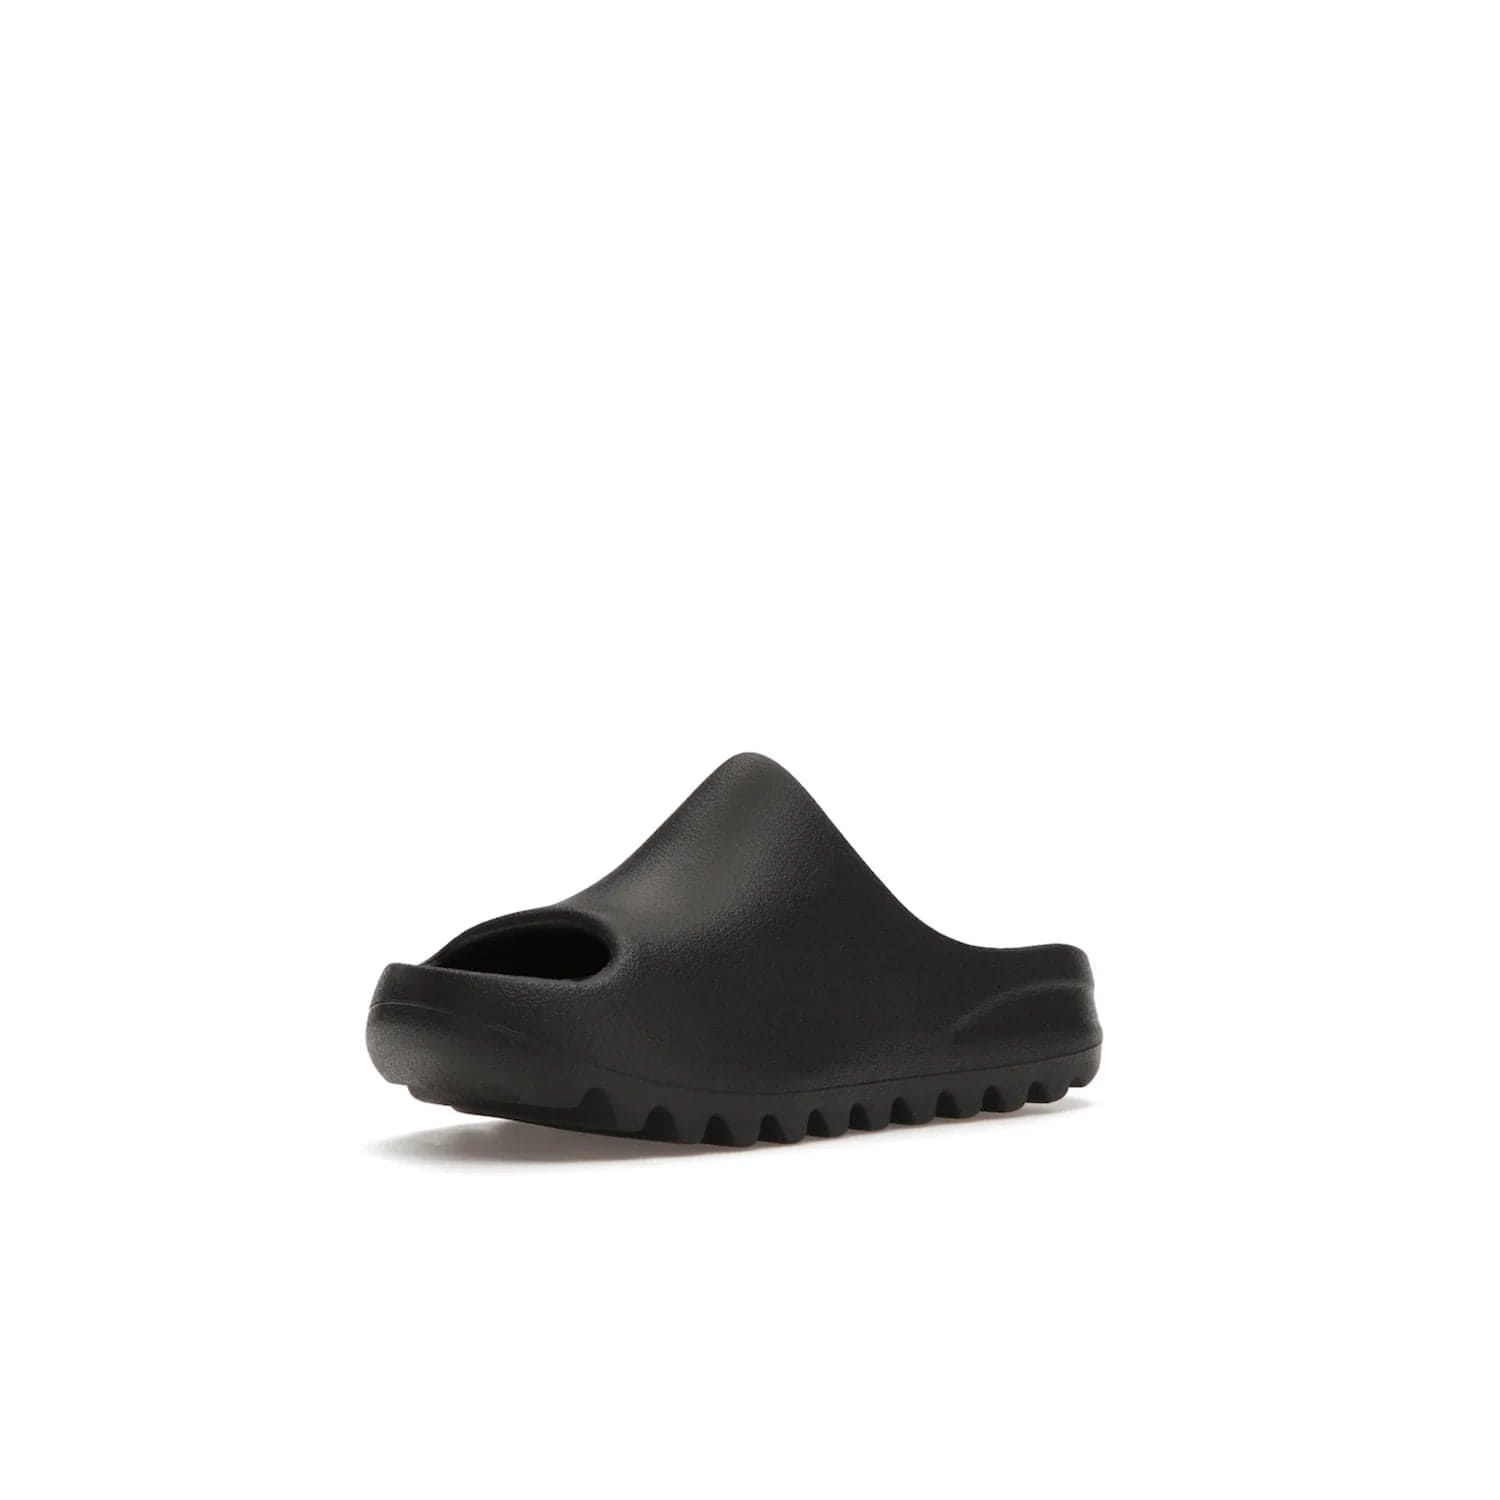 adidas Yeezy Slide Onyx (Kids) - Image 15 - Only at www.BallersClubKickz.com - adidas Yeezy Slide Onyx (Kids): Comfortable foam construction with textured surface and iconic three-stripe logo. Breathable, open-toe design and deep grooves for traction. Released in March 2021 at $50.